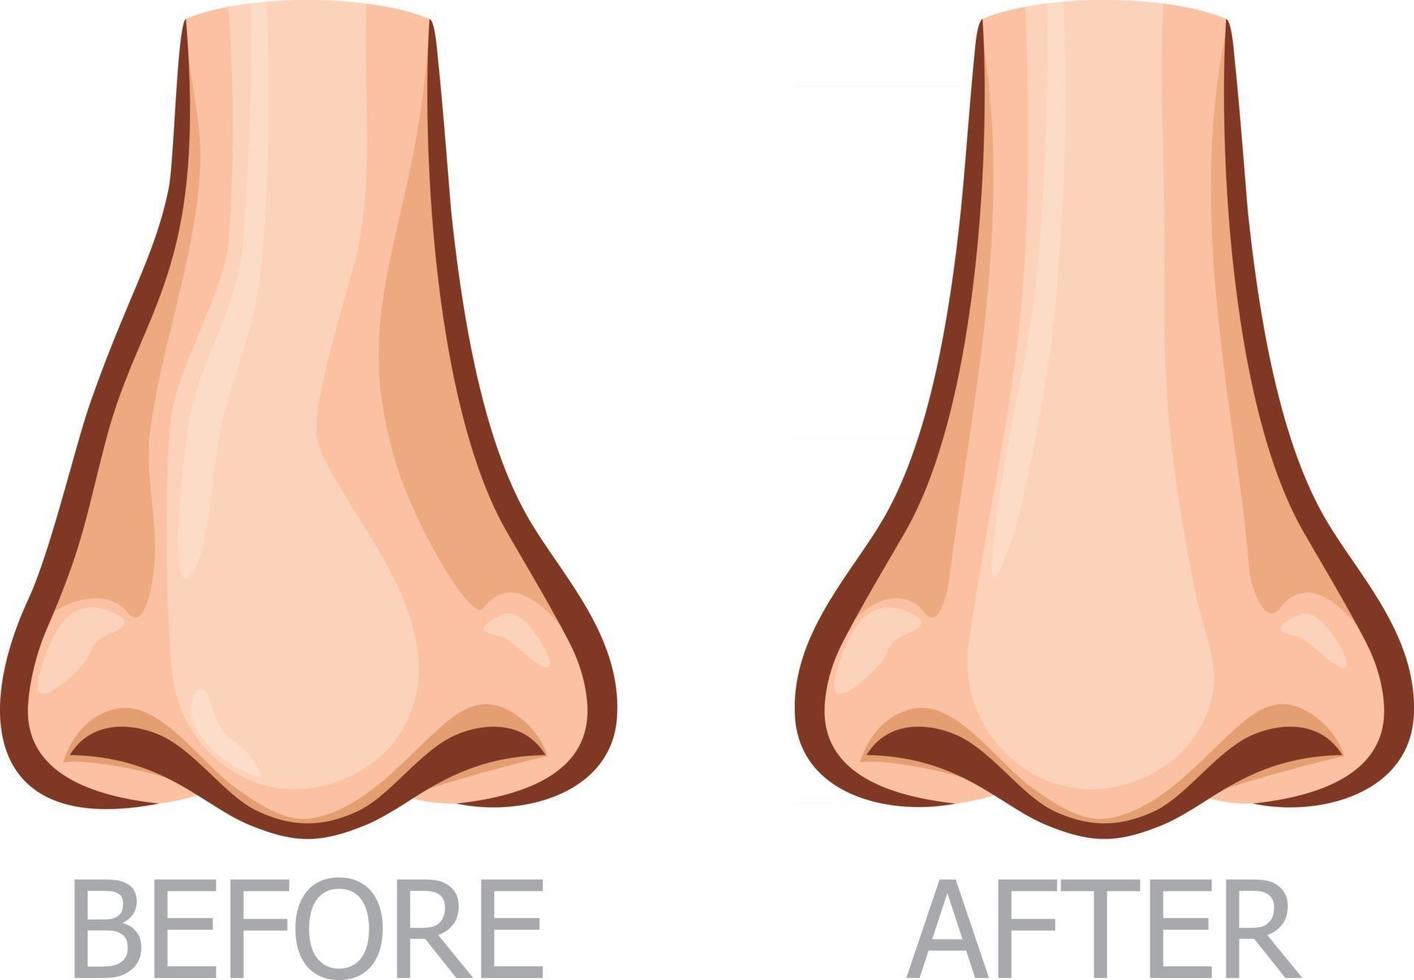 Nose Deviation Before and After vector